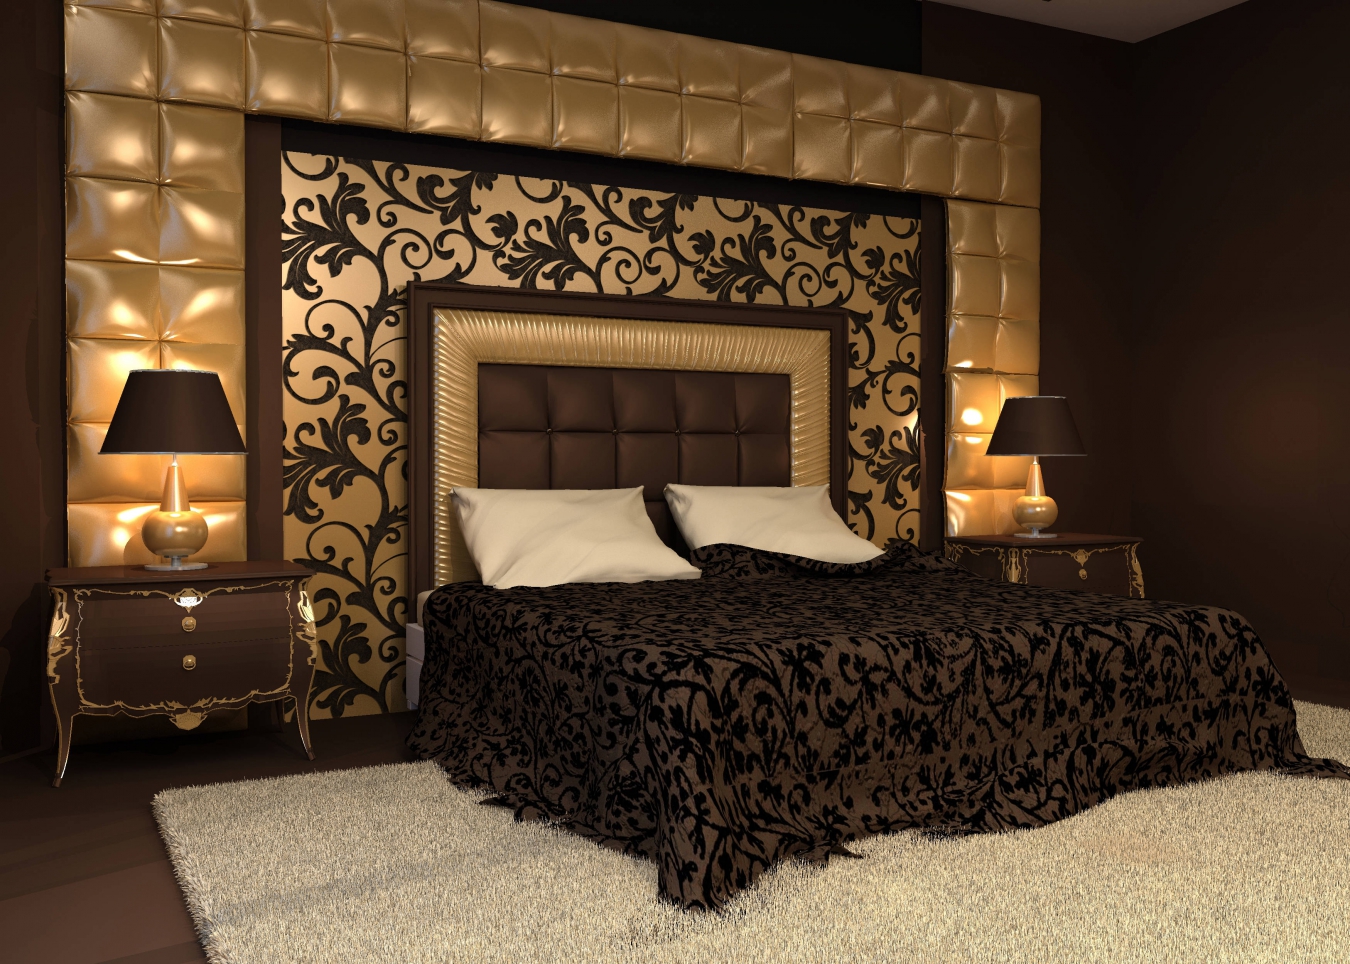 Bedroom decor in white and dark chocolate